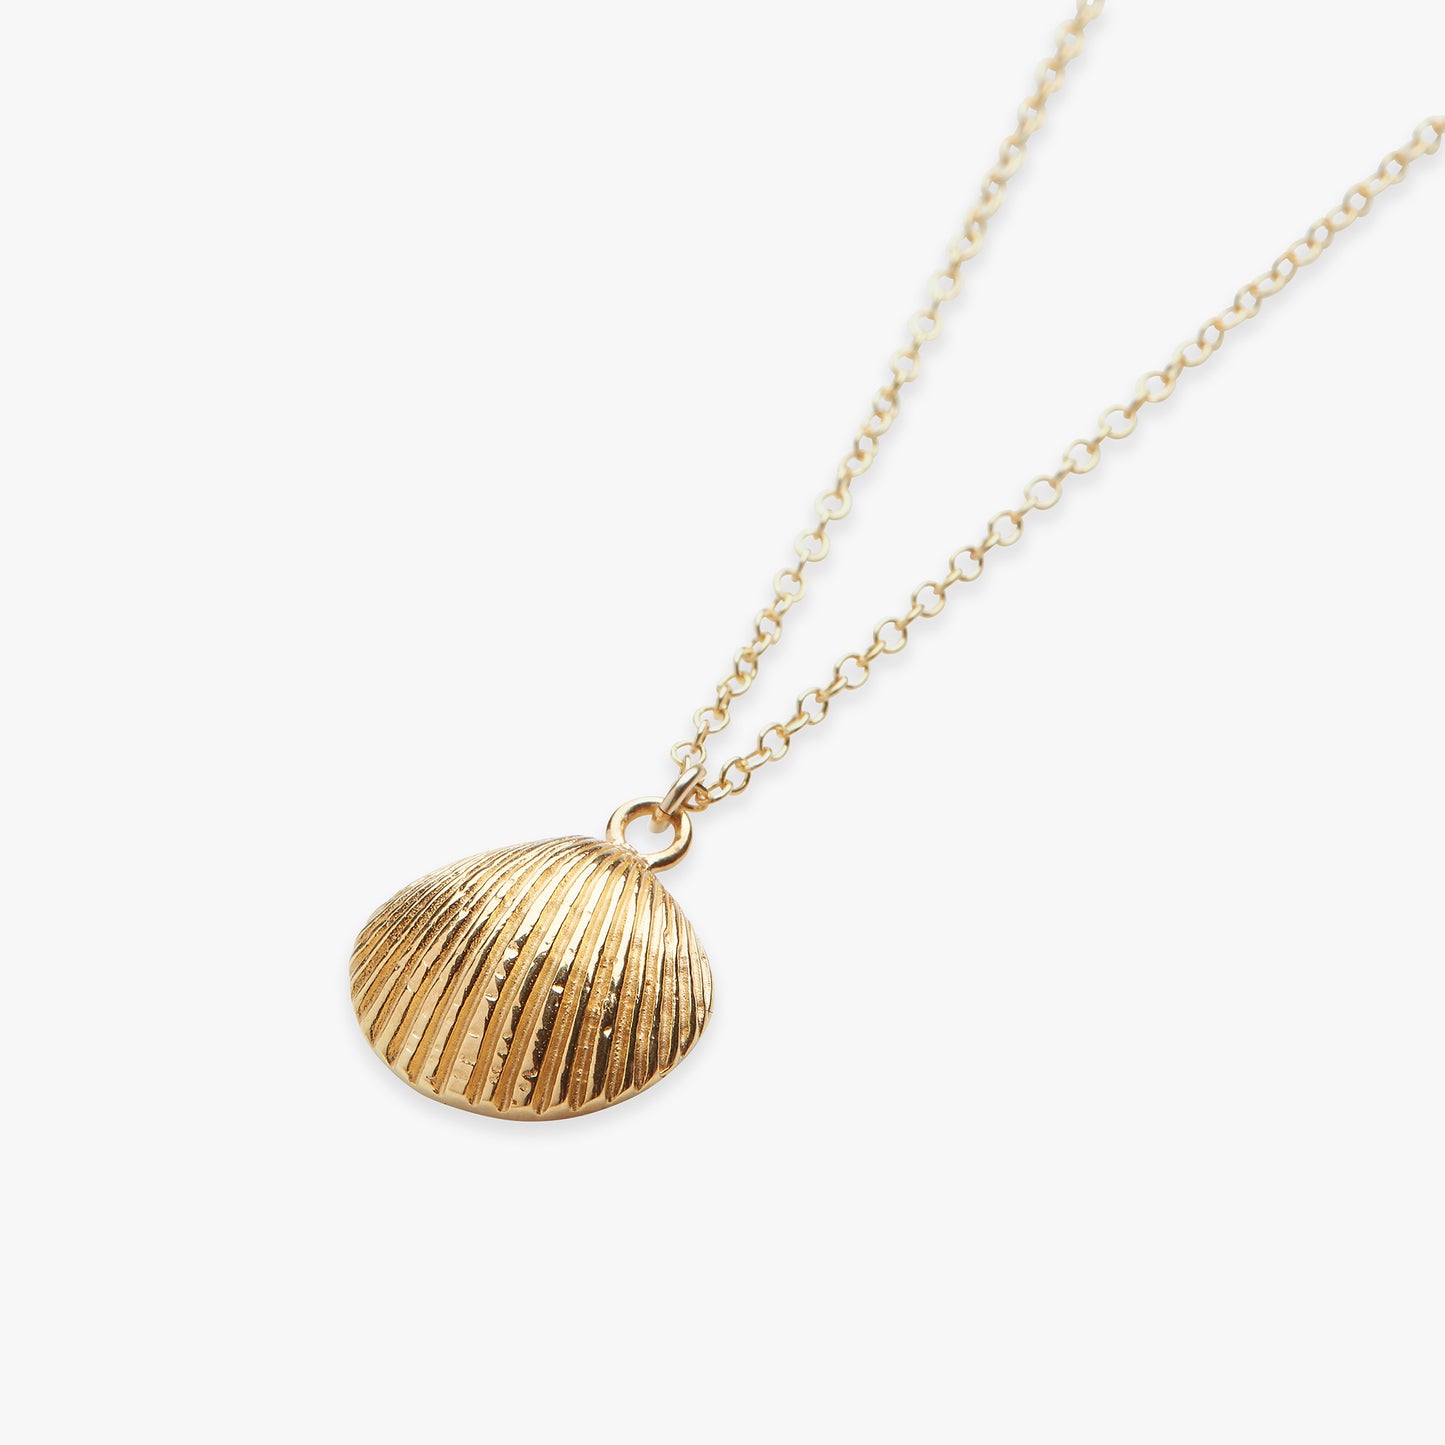 Cockle shell necklace gold filled